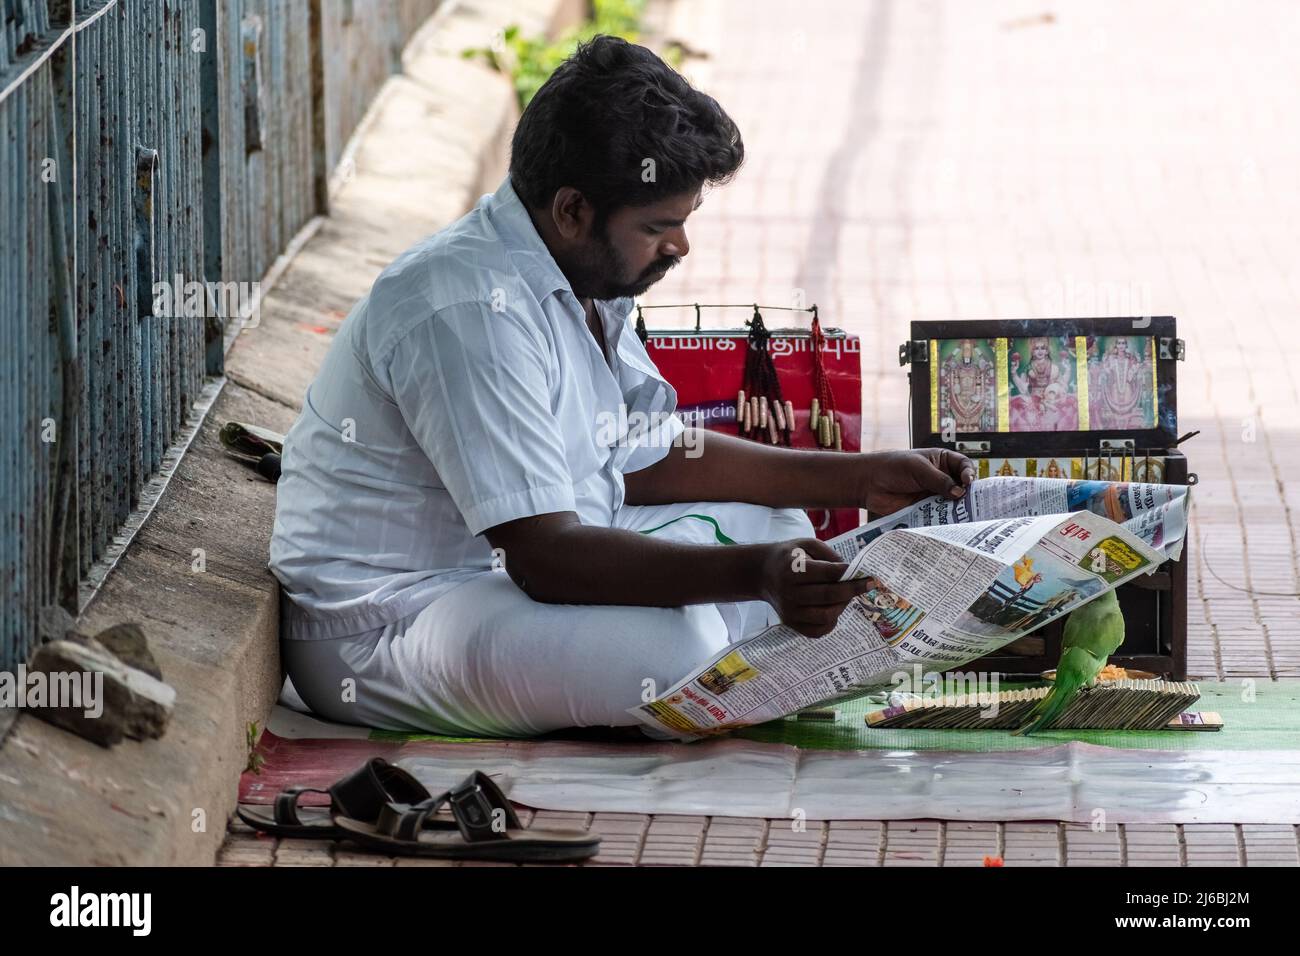 Vellore, Tamil Nadu, India - September 2018: An Indian fortune teller wearing a white shirt sitting beside his pavement shop and reading a newspaper. Stock Photo